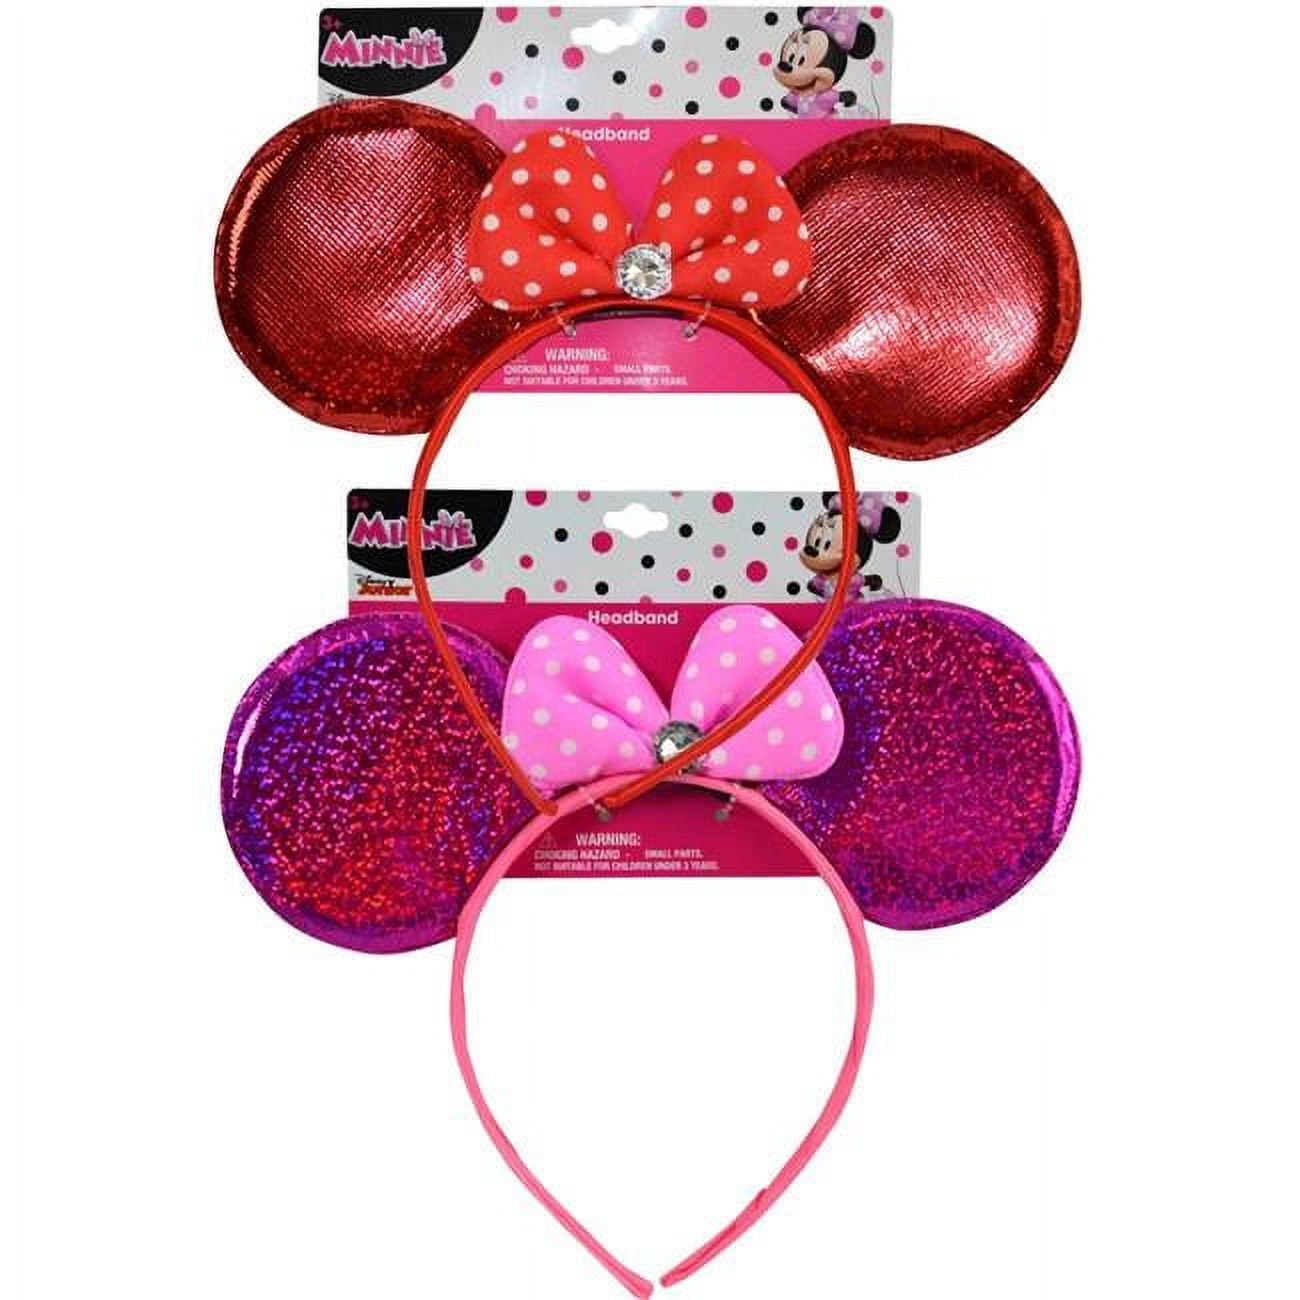 Picture of DDI 2336923 Minnie Ear Shaped Foil Headband - Assorted Case of 144